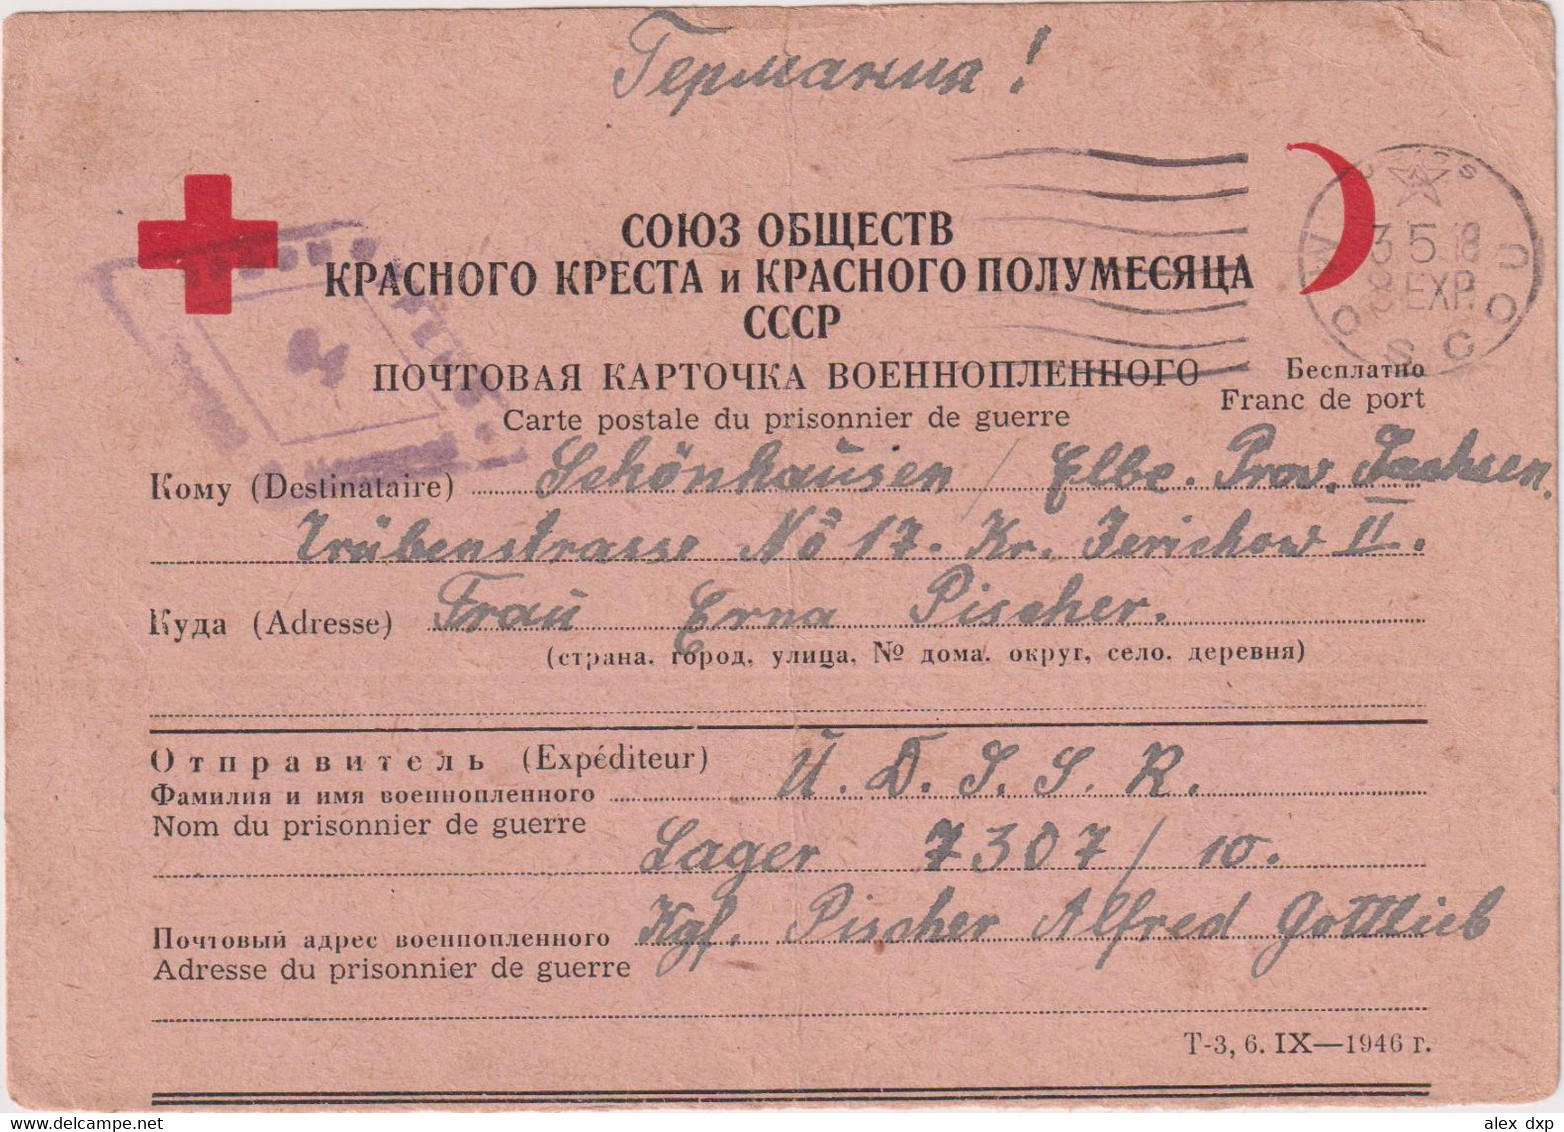 RUSSIA (USSR) > 1948 POSTAL HISTORY > POW RED CROSS CARD FROM POW CAMP 7307/10 TO SCHOHAUSEN, GERMANY - Briefe U. Dokumente